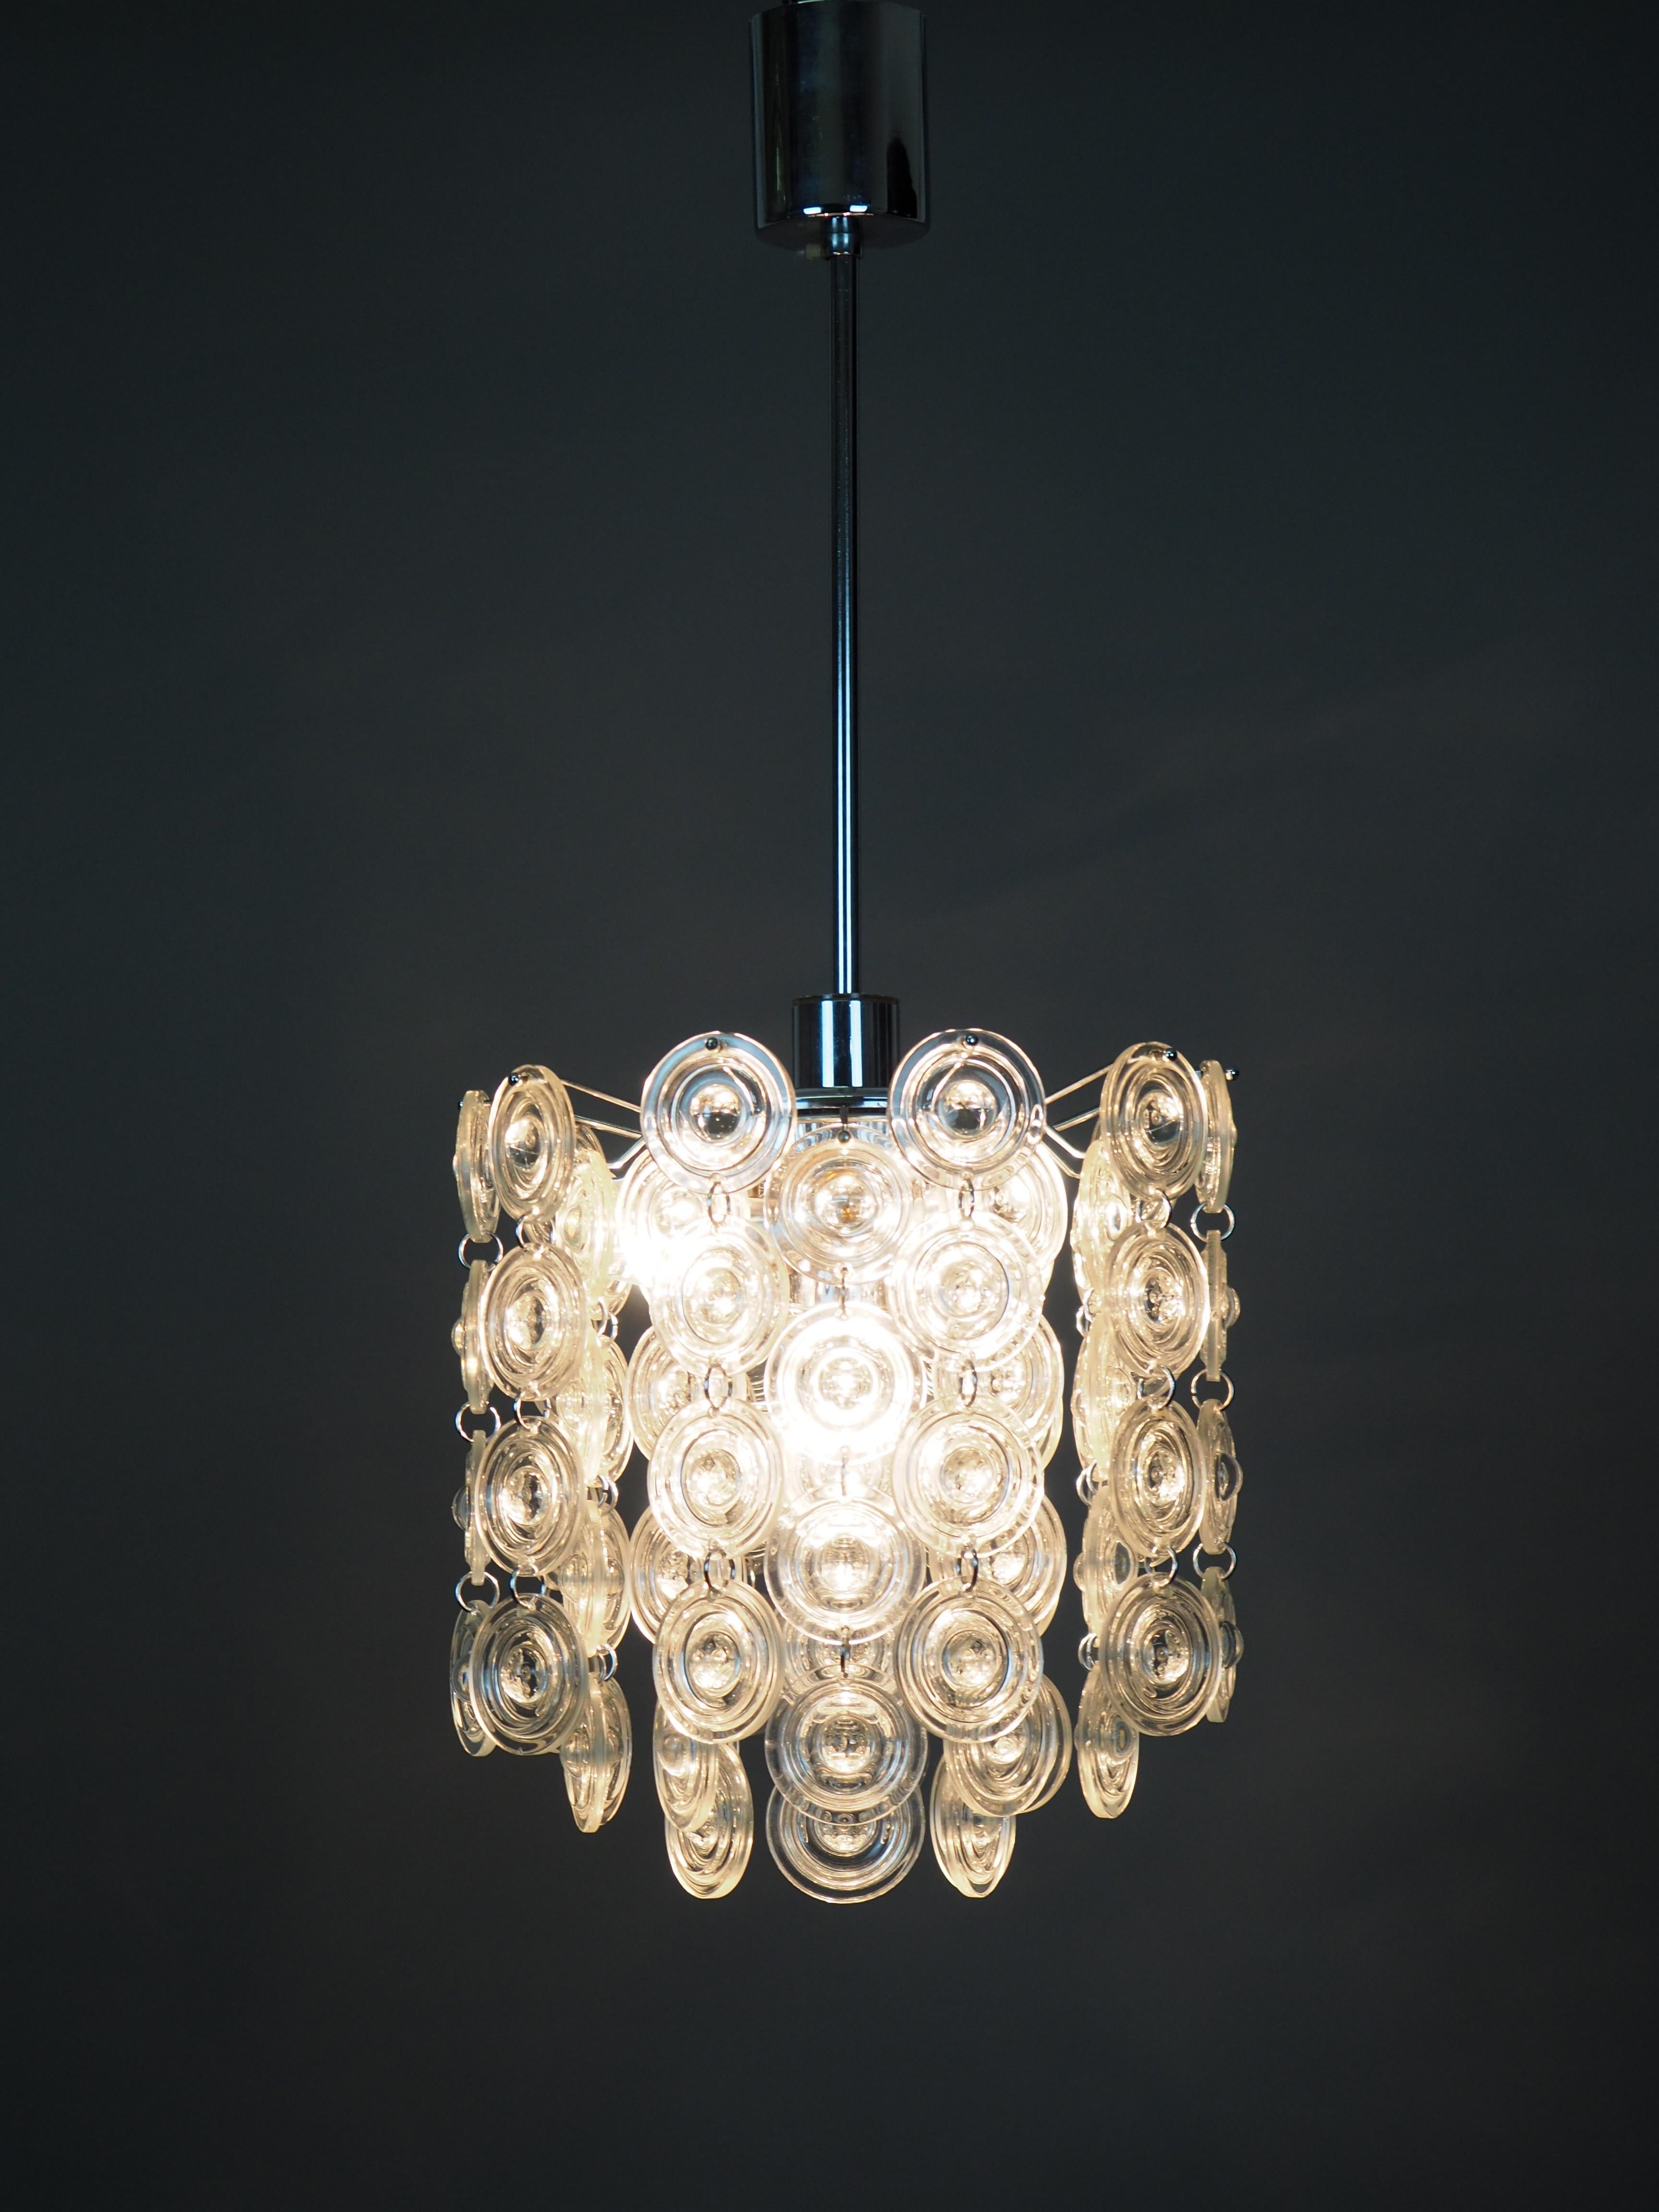 Mid-Century Modern Rare Glass and Nickel Chandelier by Sciolari, Italy, circa 1970s For Sale